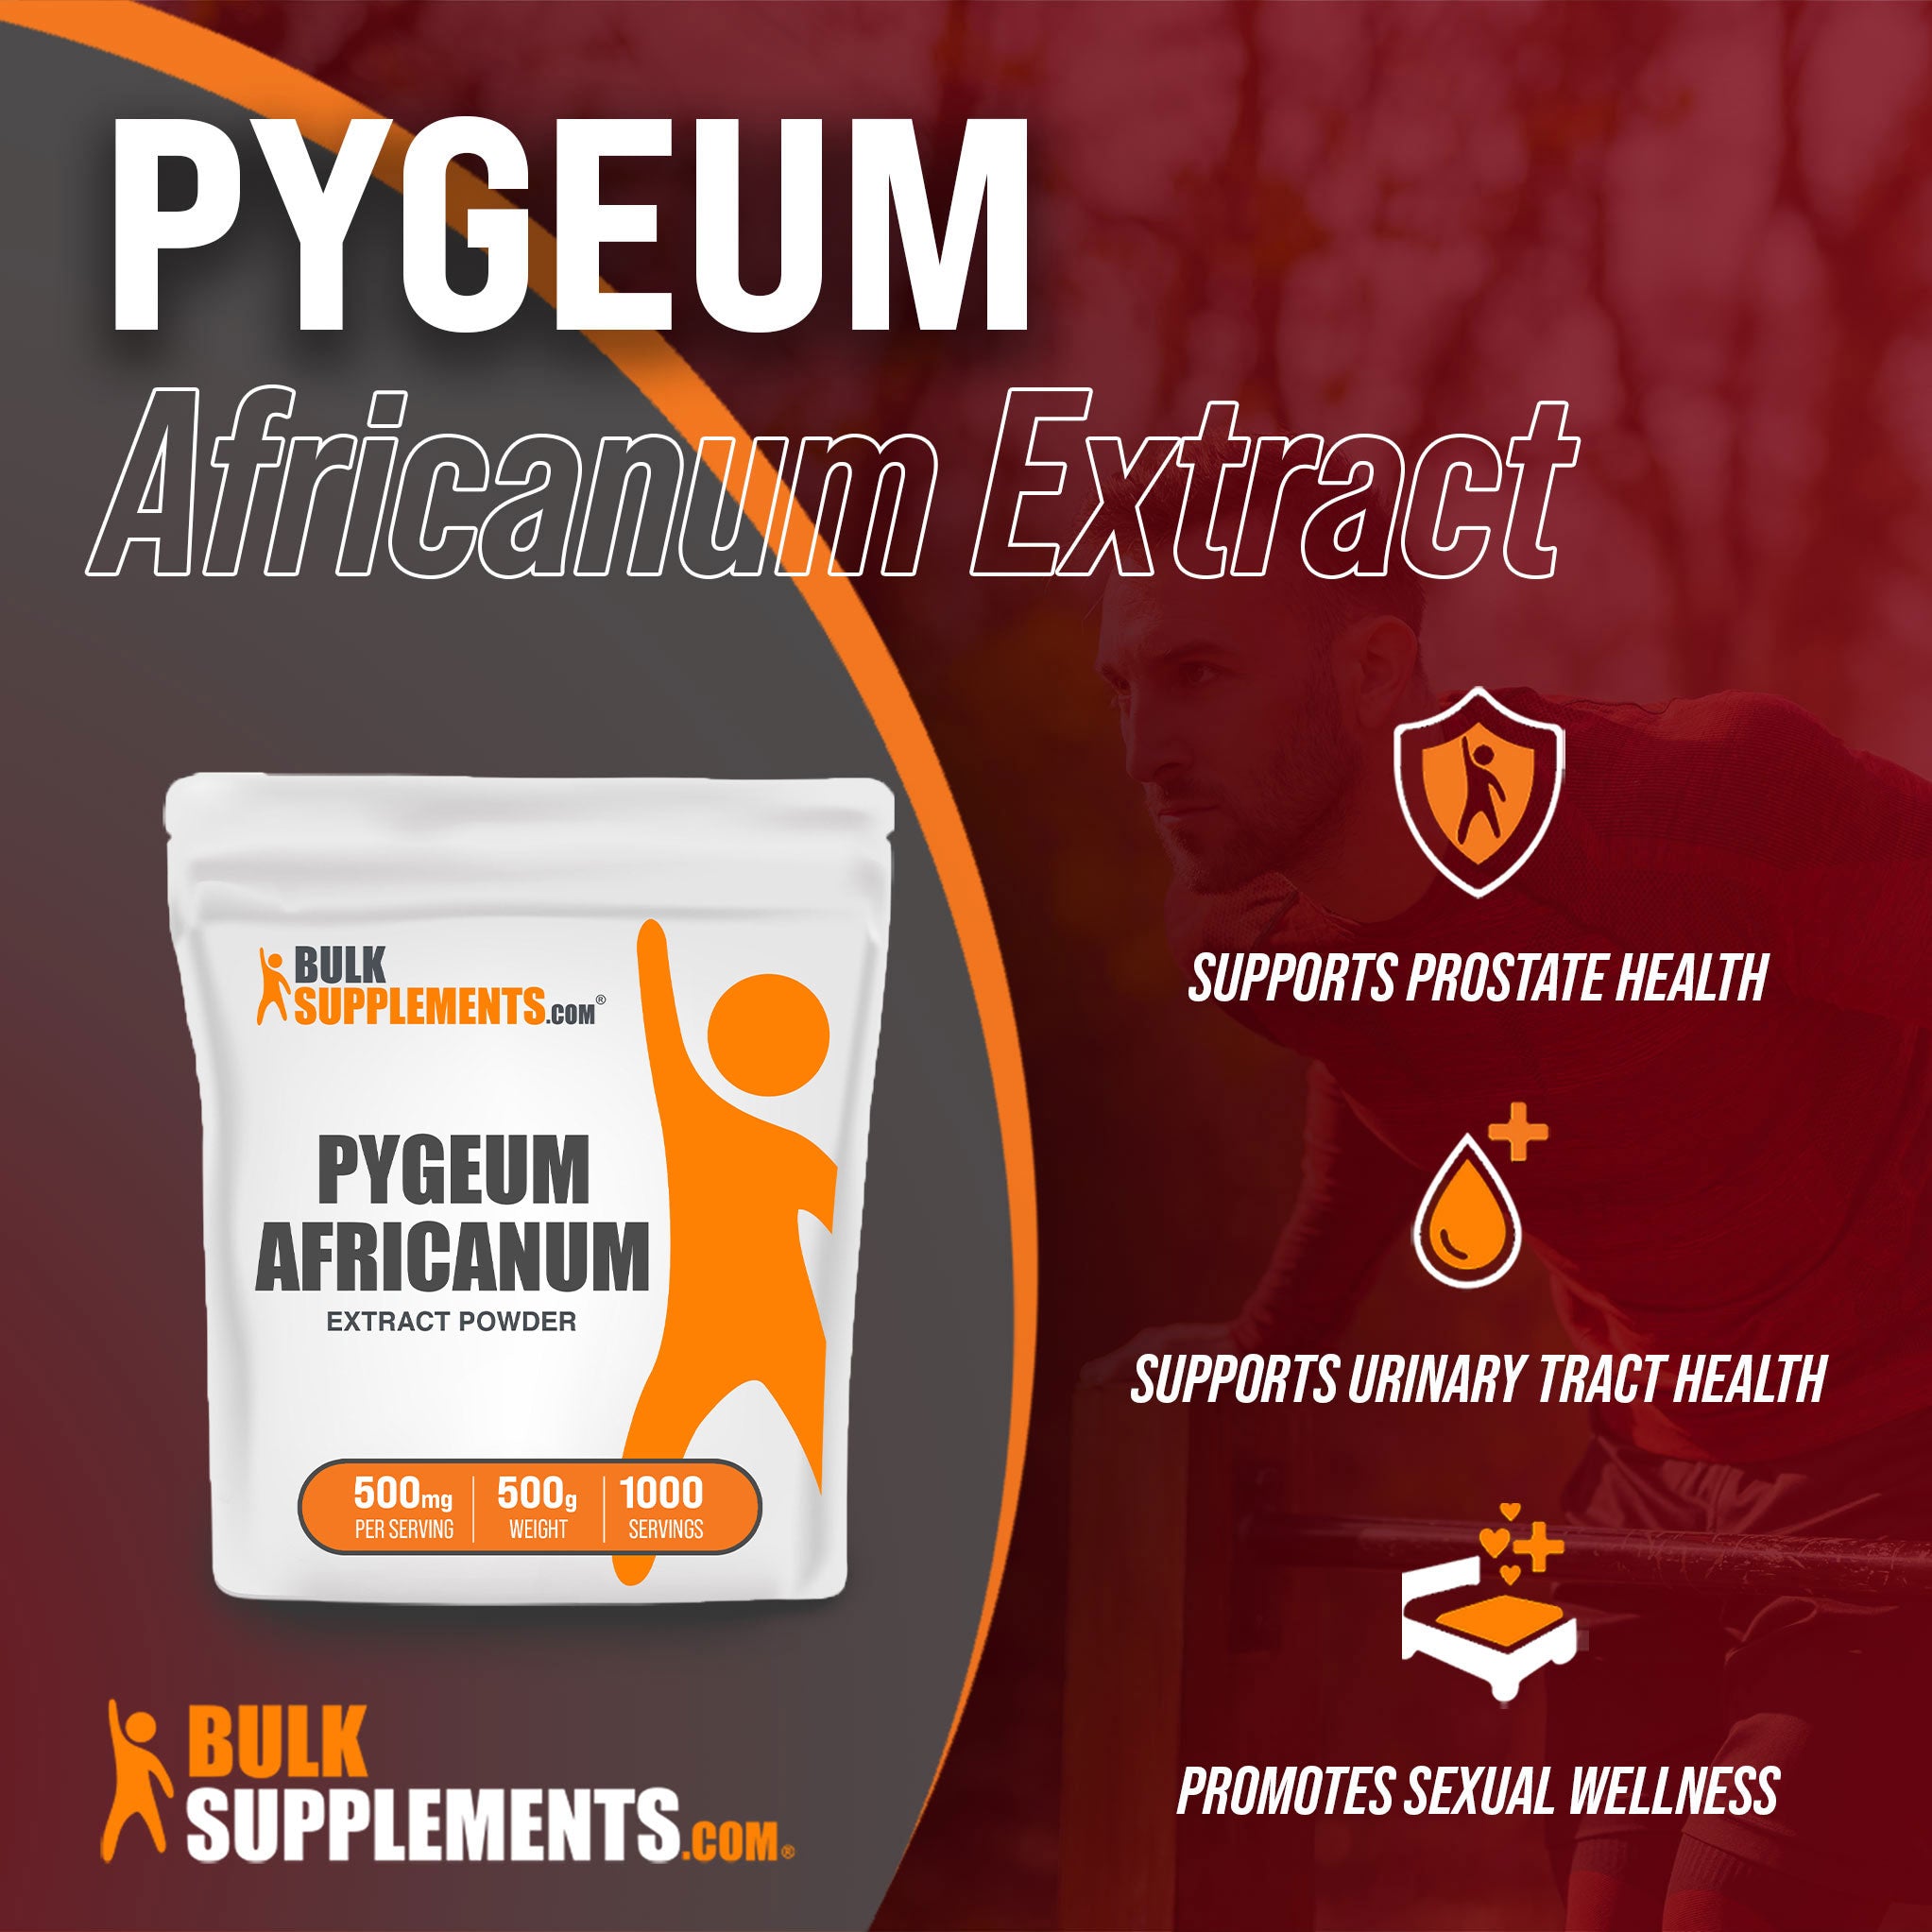 Benefits of Pygeum Africanum Extract: supports prostate health, supports urinary tract health, promotes sexual wellness